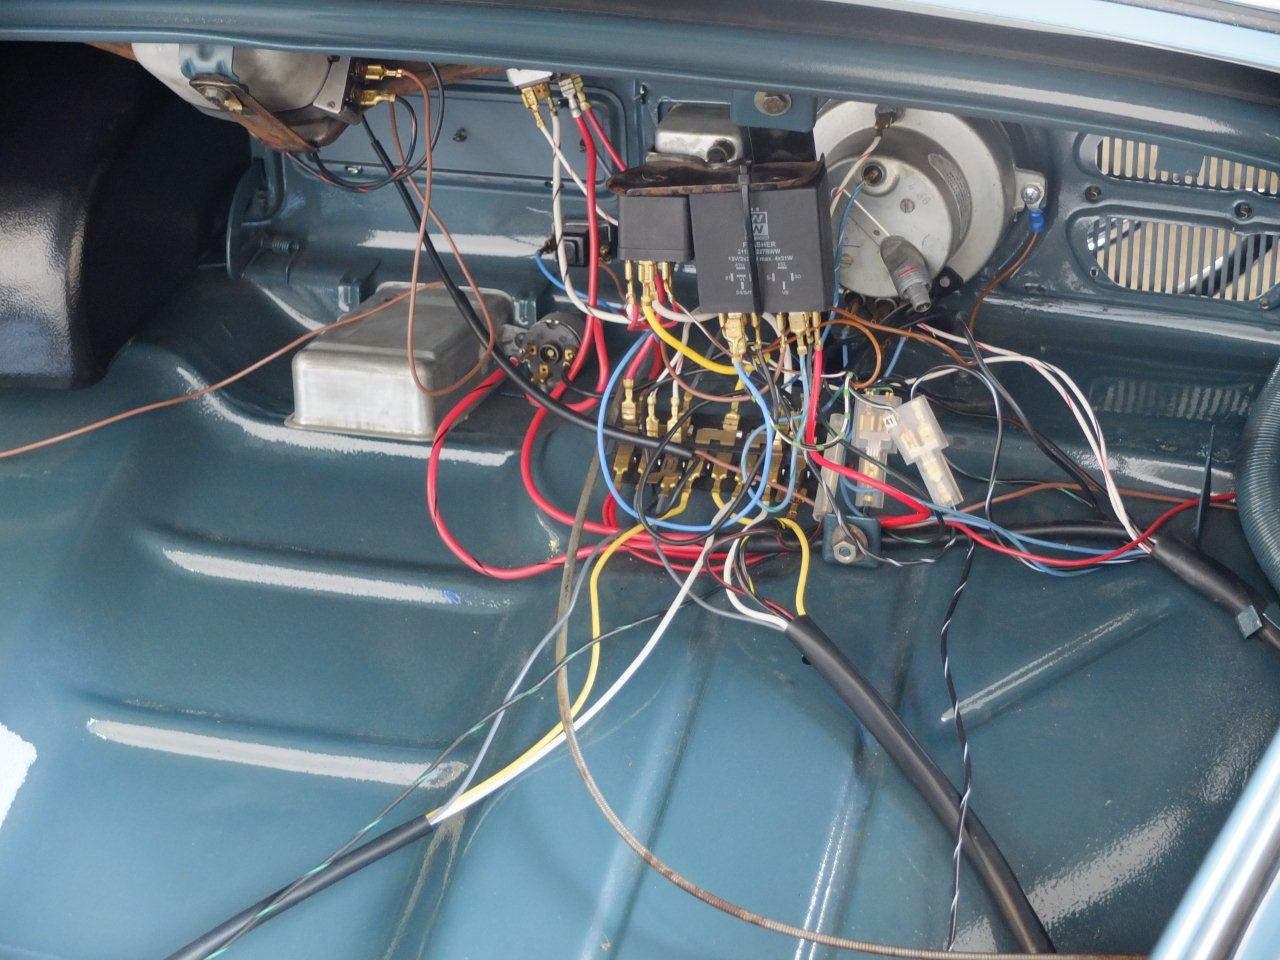 1966 VW Beetle Project | VW BLVD – And Other Stuff… | Page 10 vw bug horn wiring 